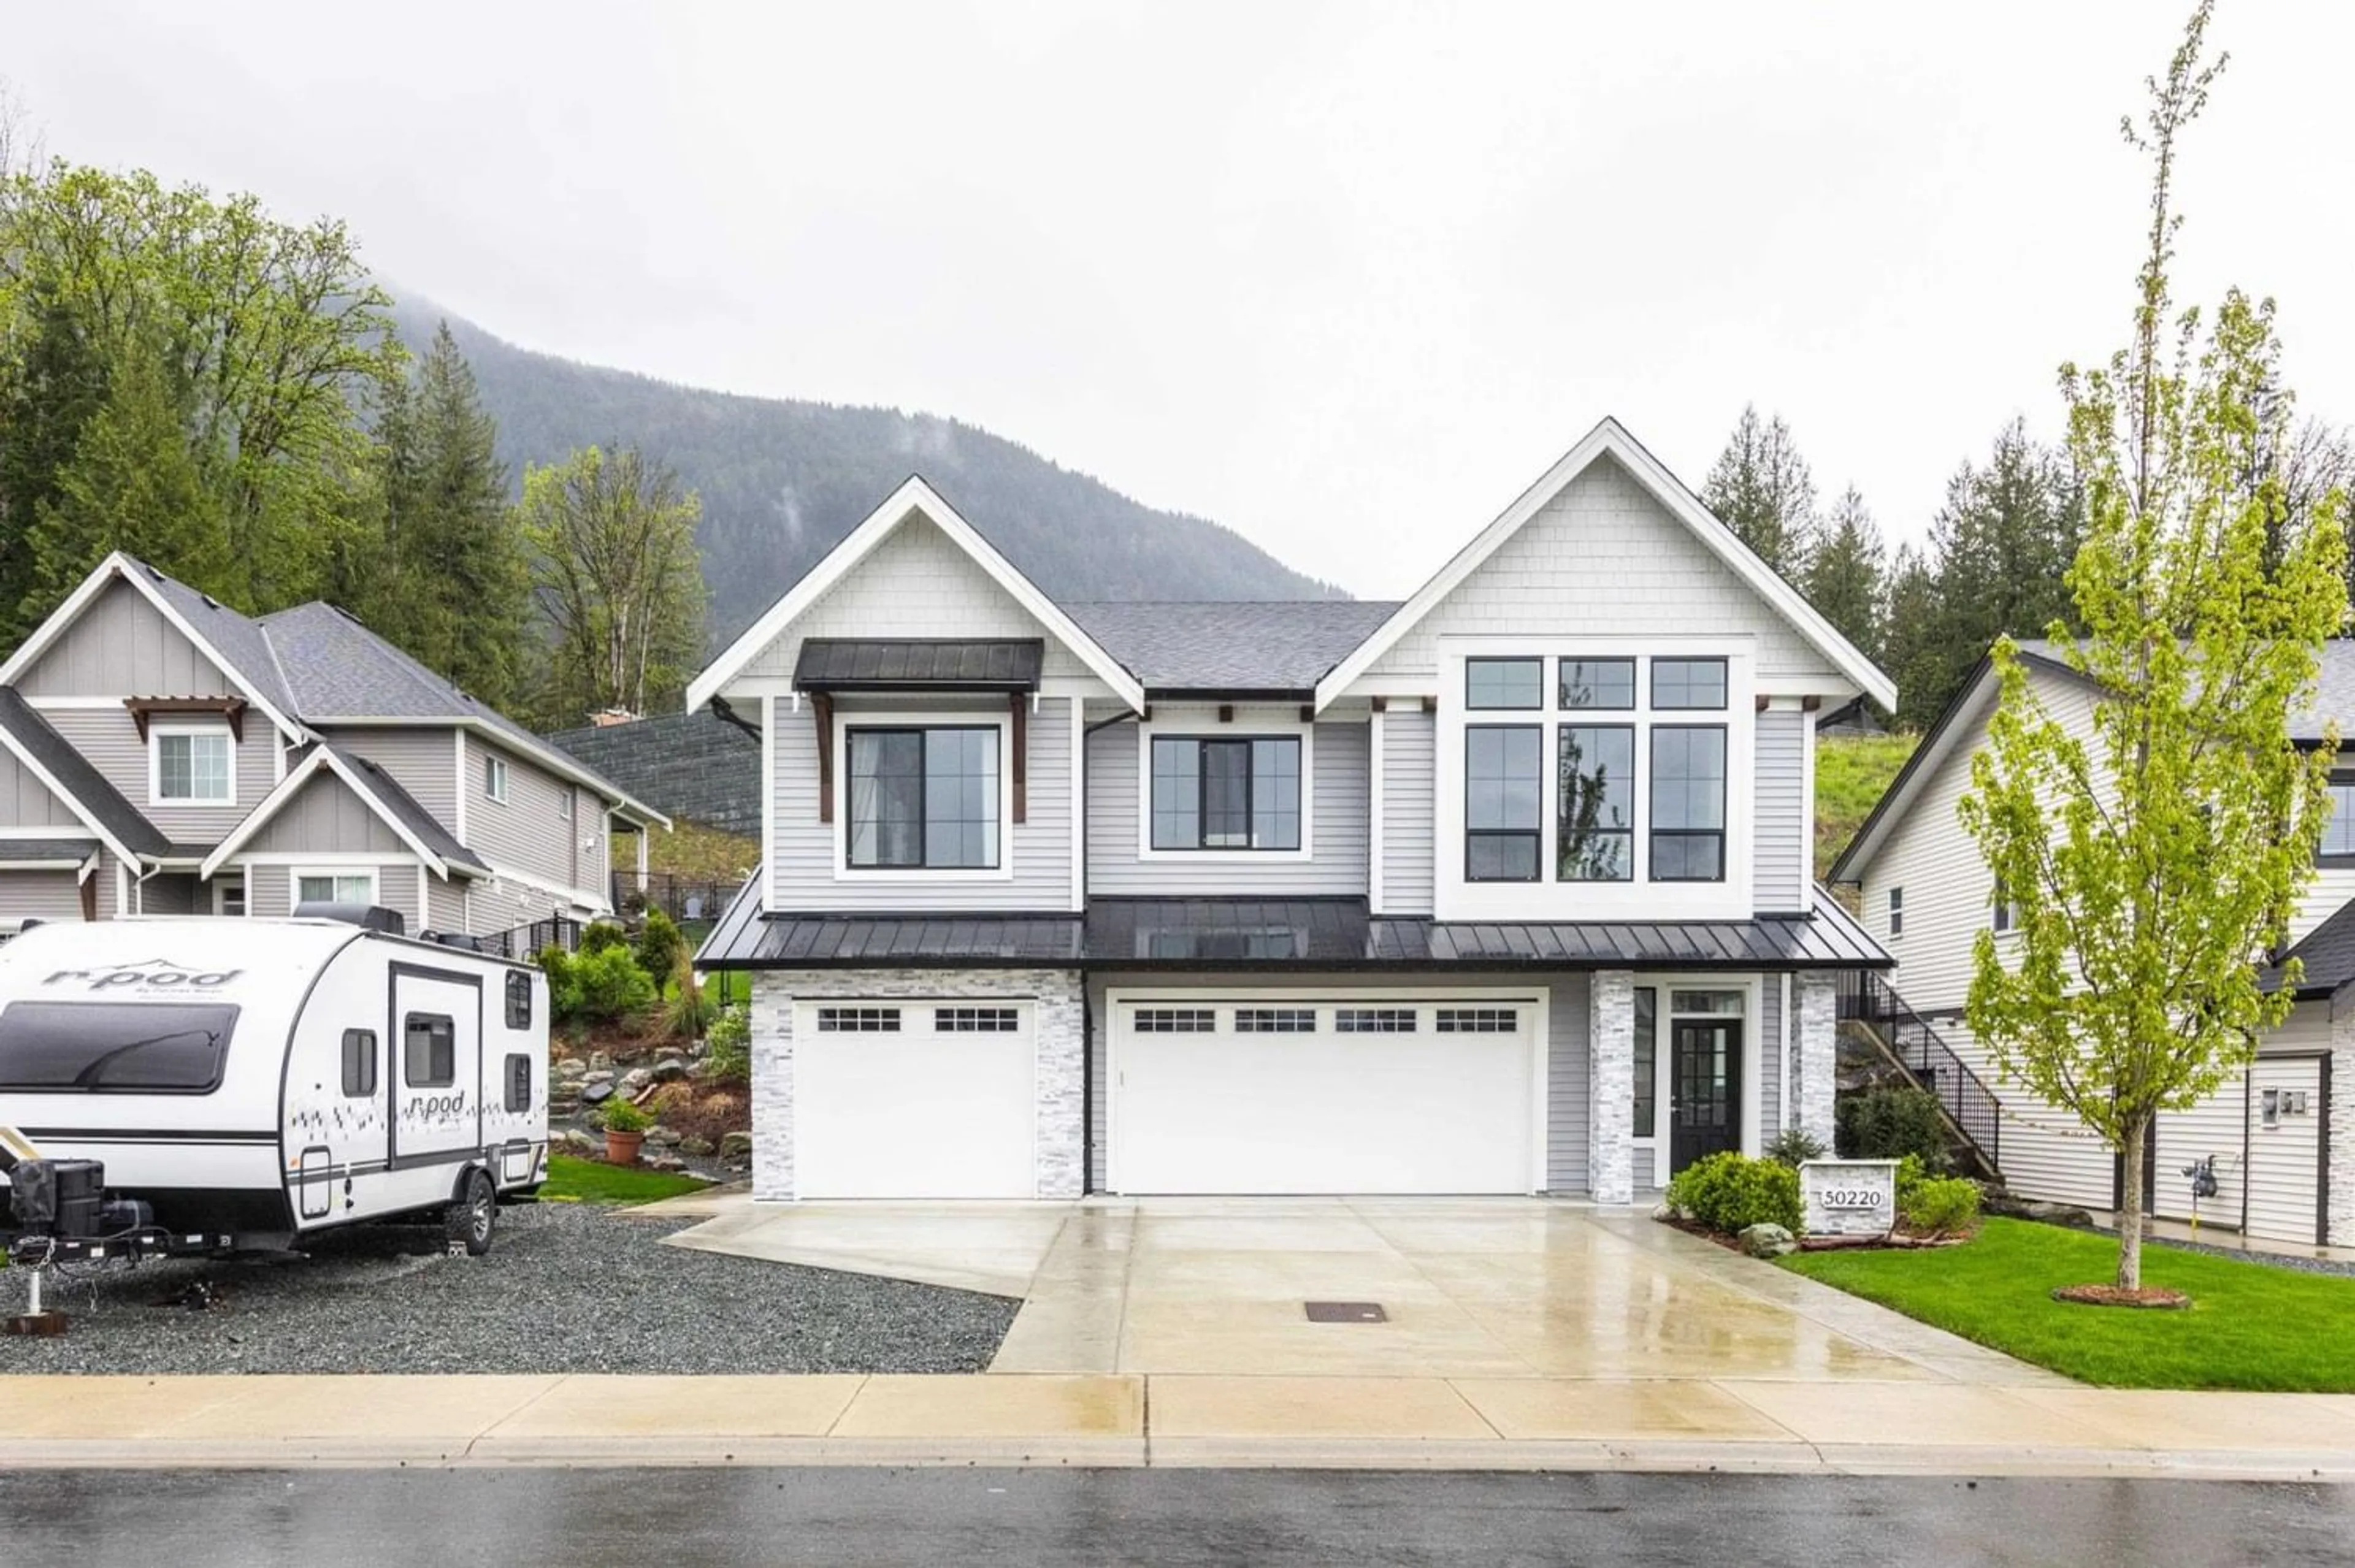 A pic from exterior of the house or condo for 50220 KENSINGTON DRIVE, Chilliwack British Columbia V4Z1J5